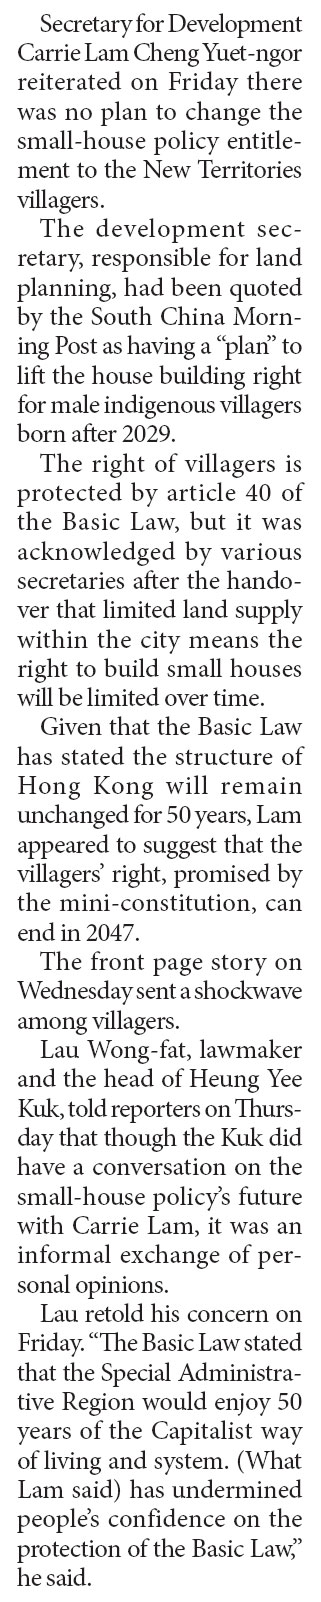 No changes planned to small-house policy: Lam